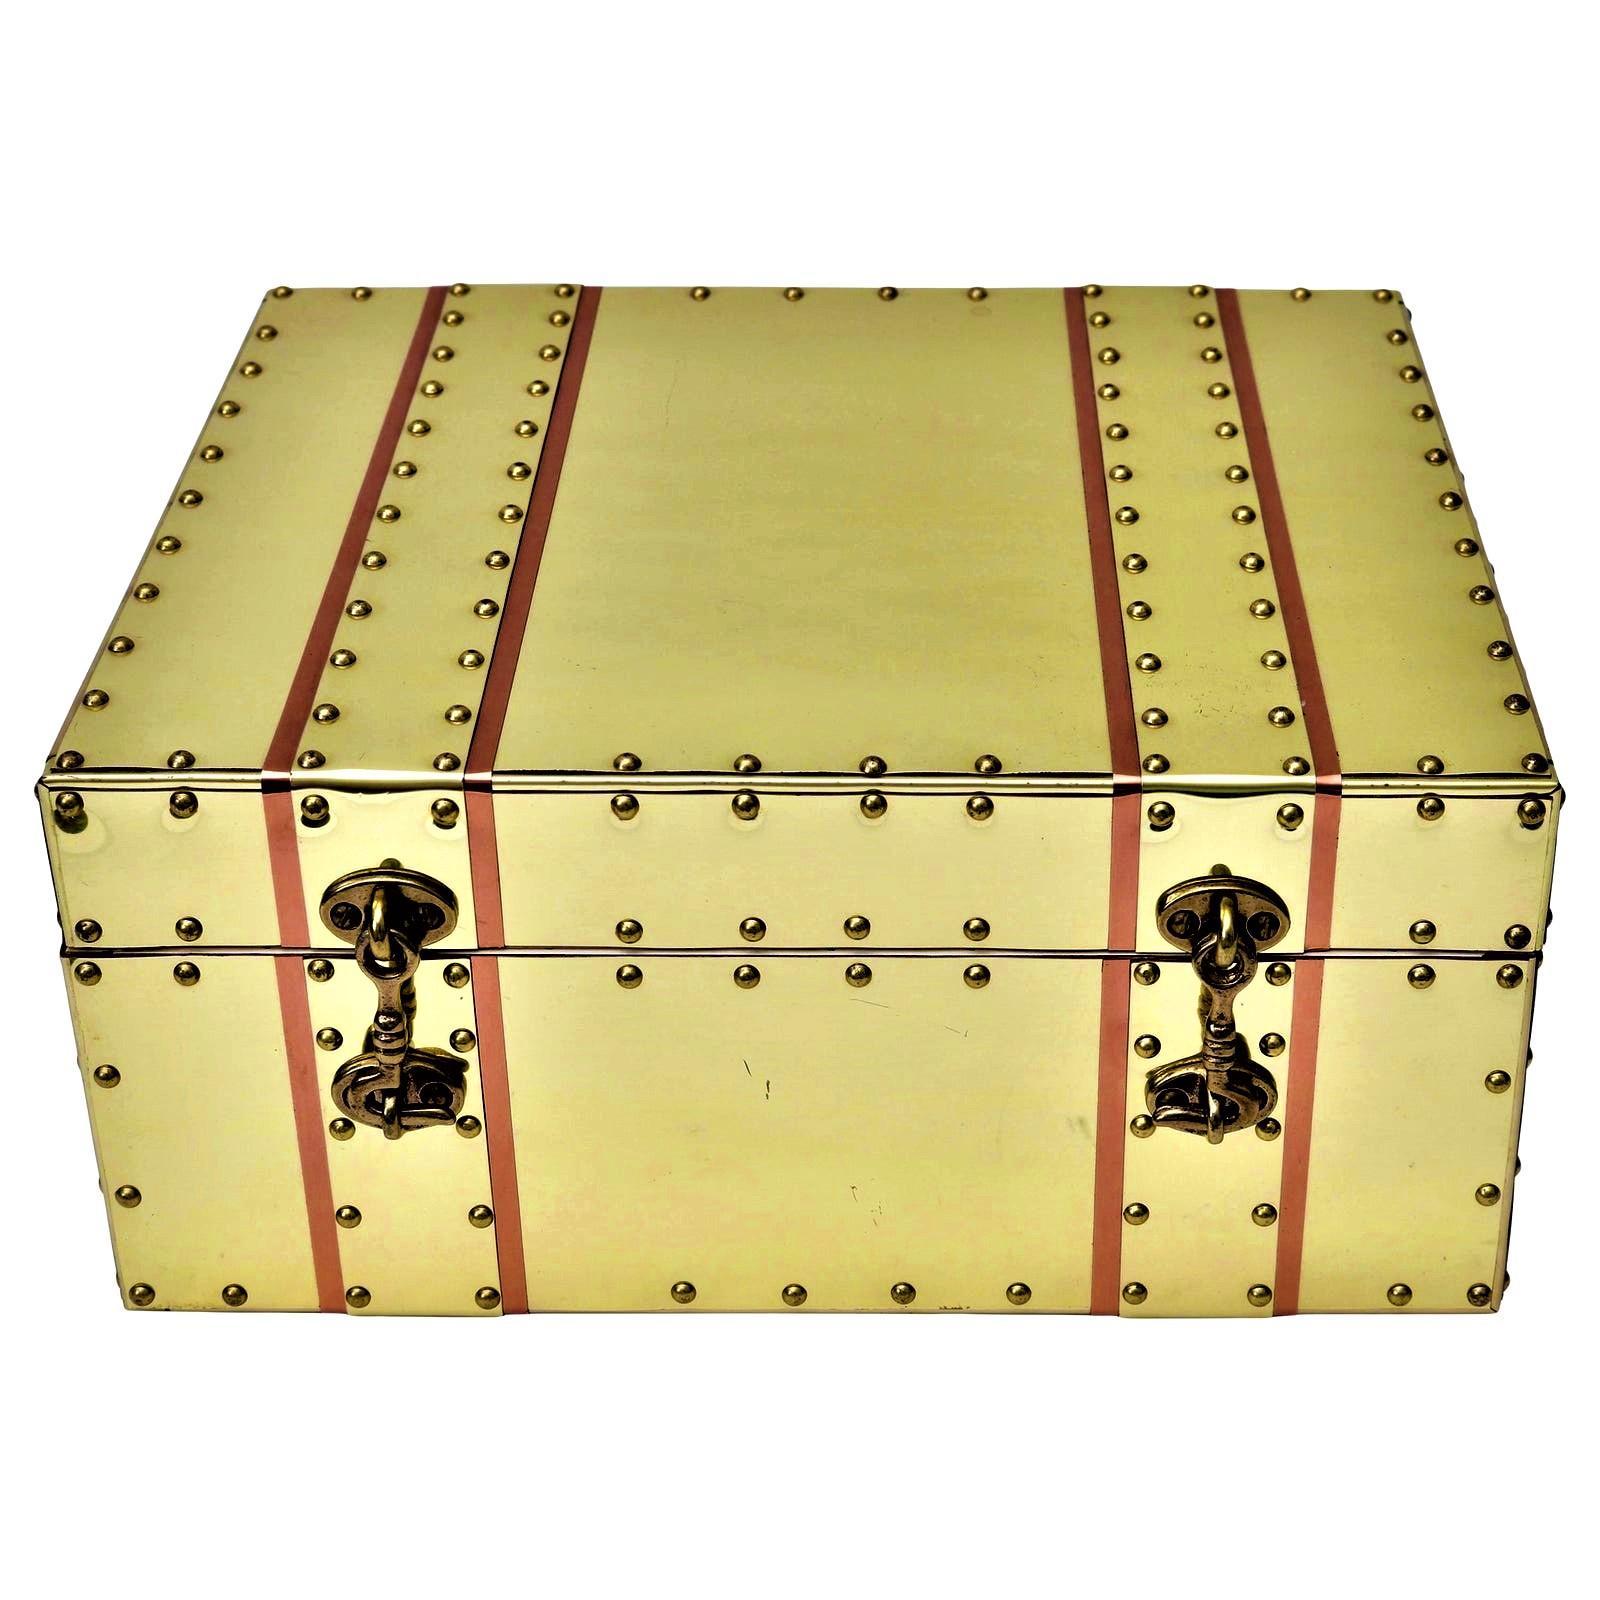 This handsome storage box is very much in the style of pieces created by Sarreid in the 1970s. The interior has a paper lining.

Note: This piece has been professionally polished and clear lacquered.

For best net trade price or additional